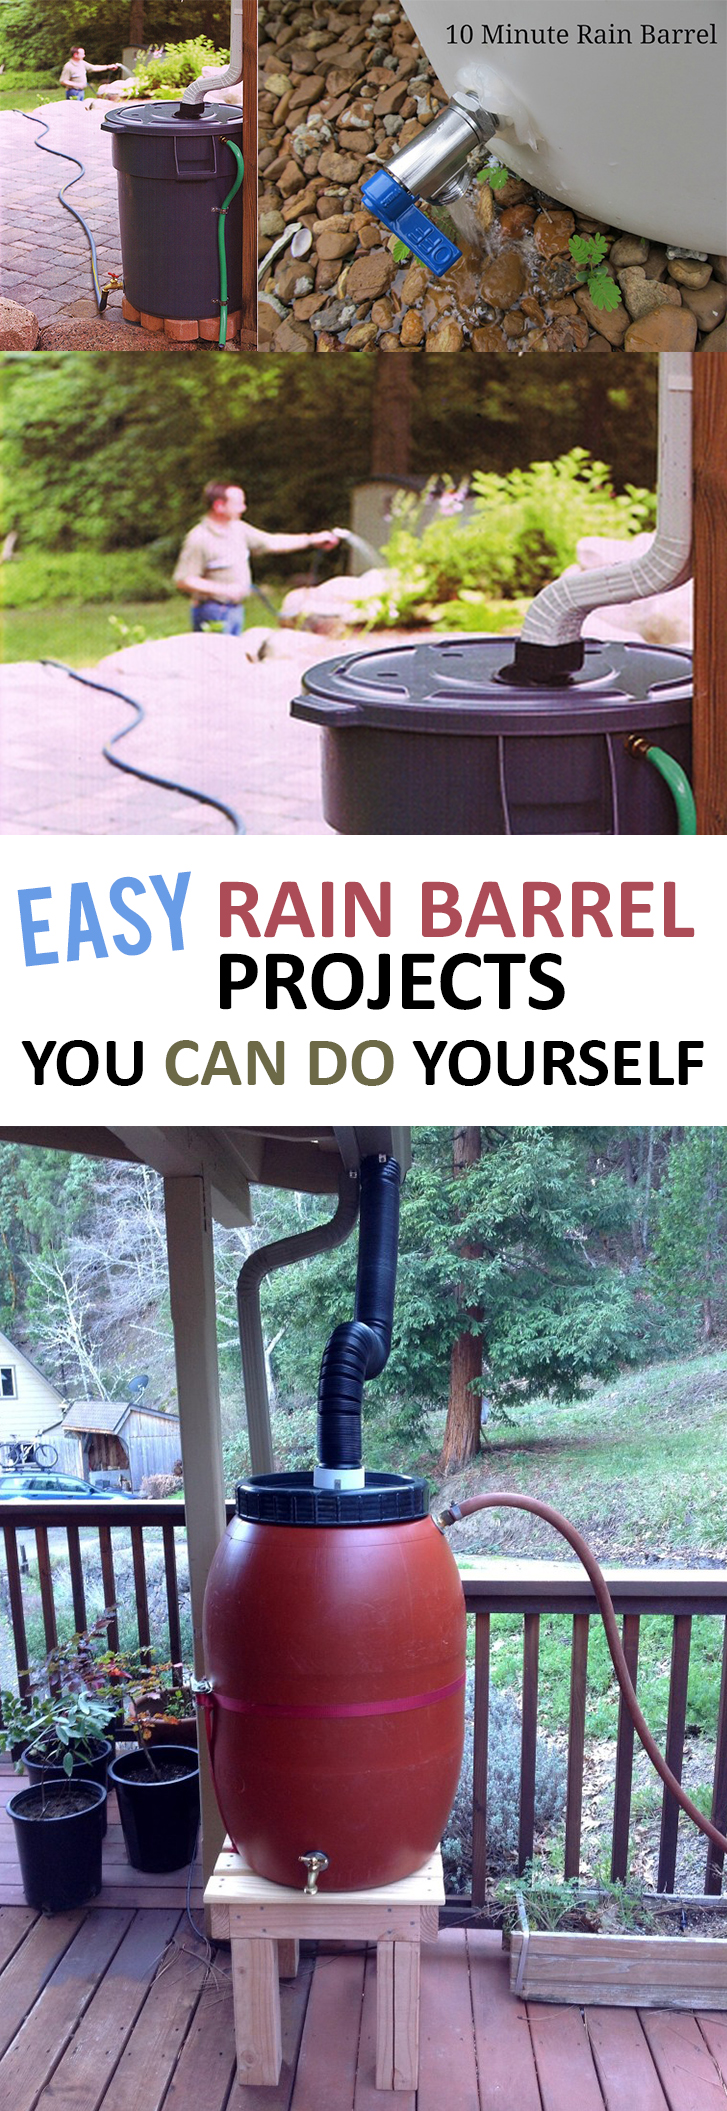 Easy Rain Barrel Projects You Can Do Yourself